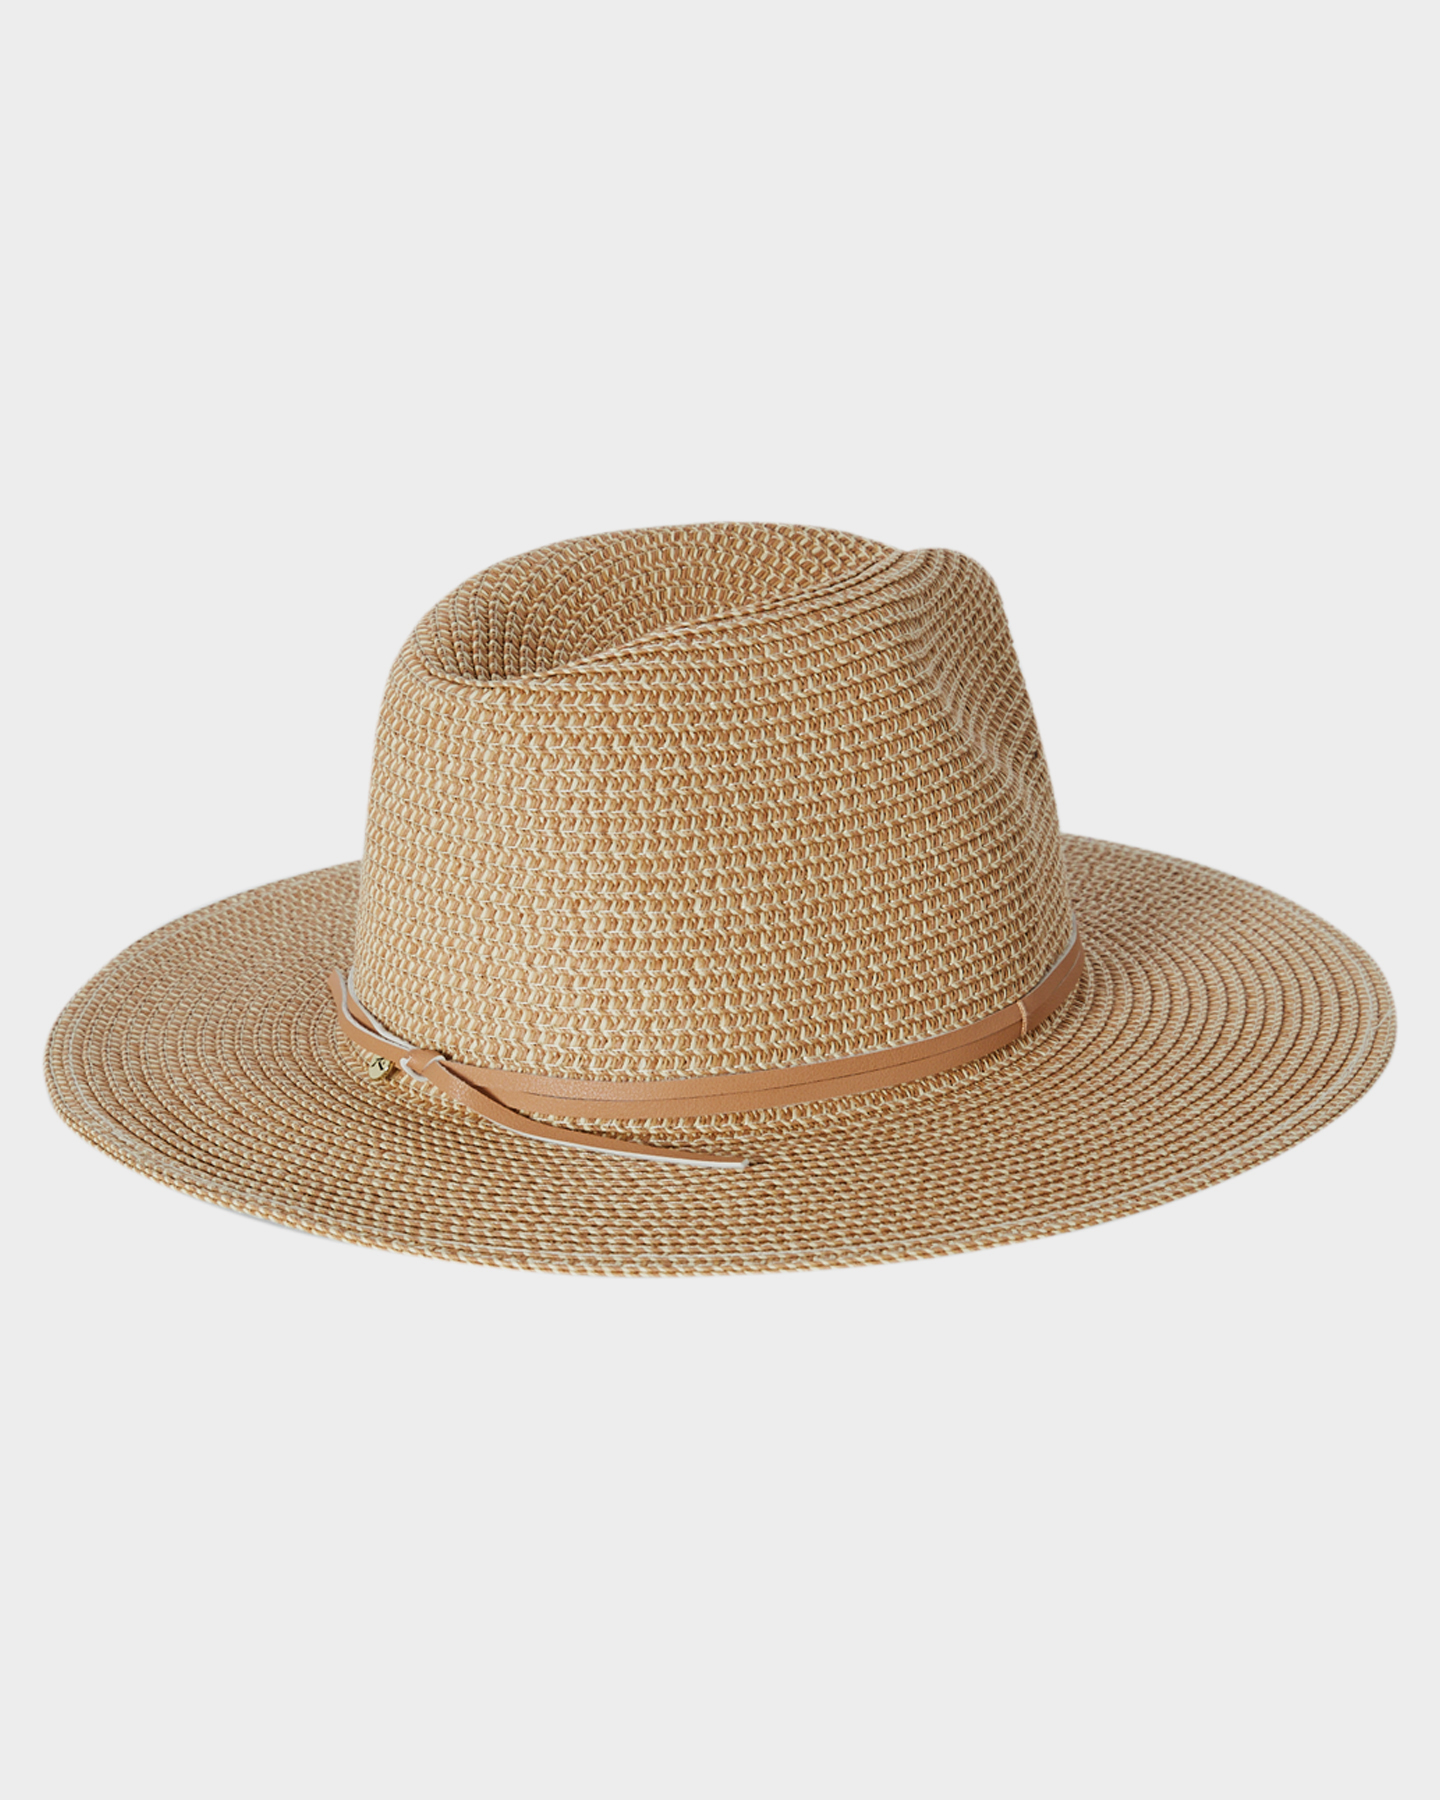 Rusty Gisele Straw Hat - Natural Caramel | SurfStitch